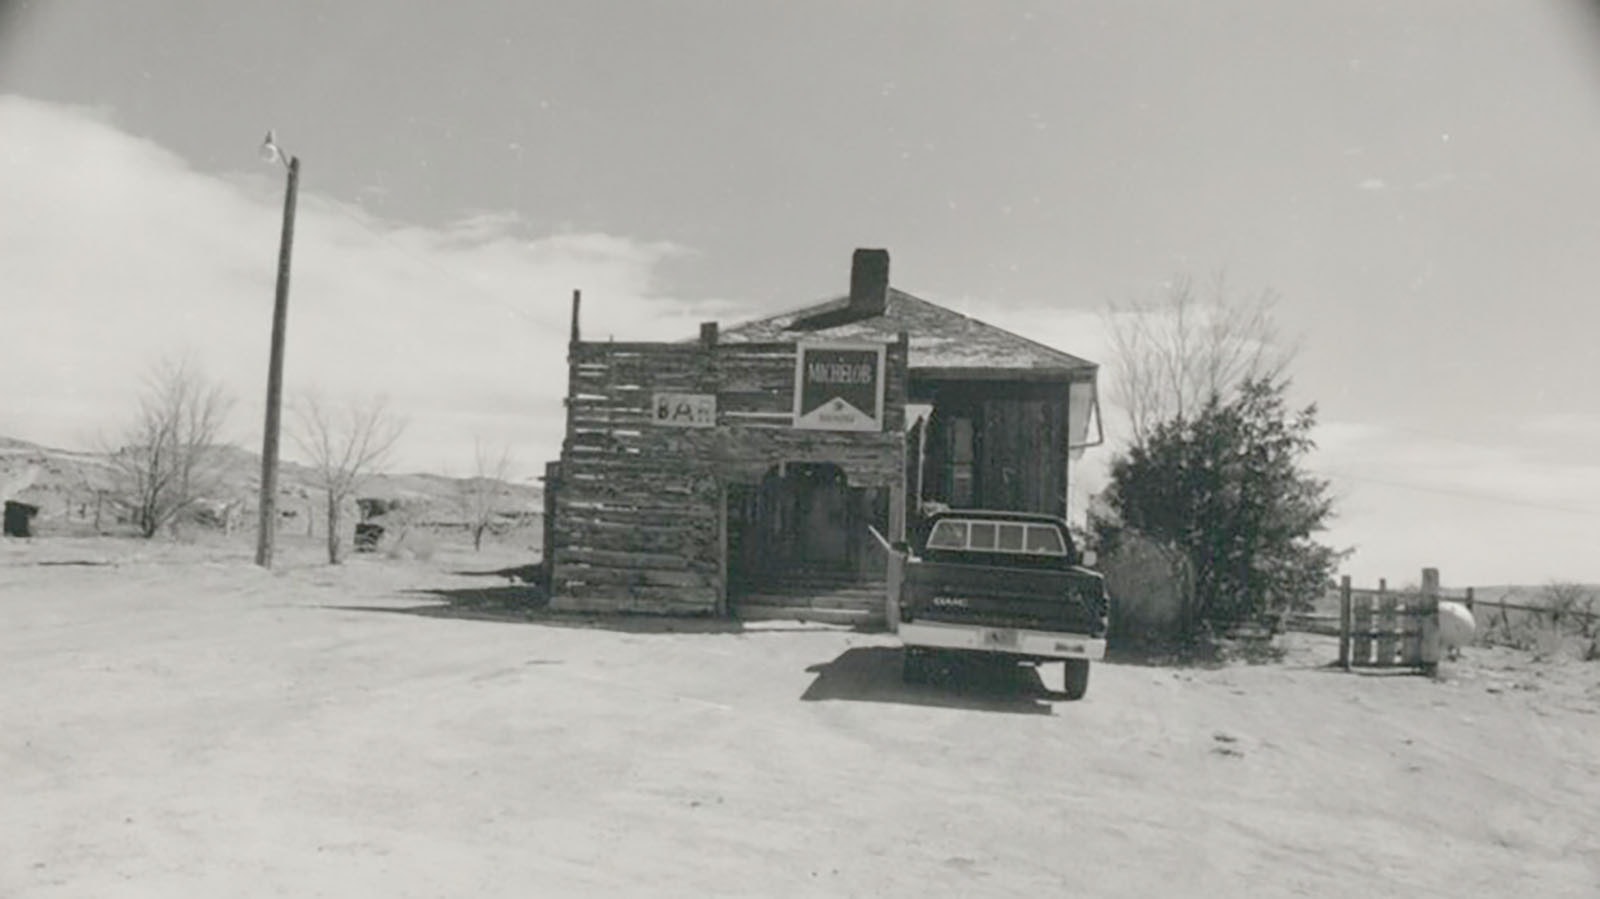 The Bonneville Bar in either 1987 or 1988 in a photo by Robert C. Cutshaw. In 1921, the town became the end of the road for a truck driver hauling nitroglycerine and his passenger.